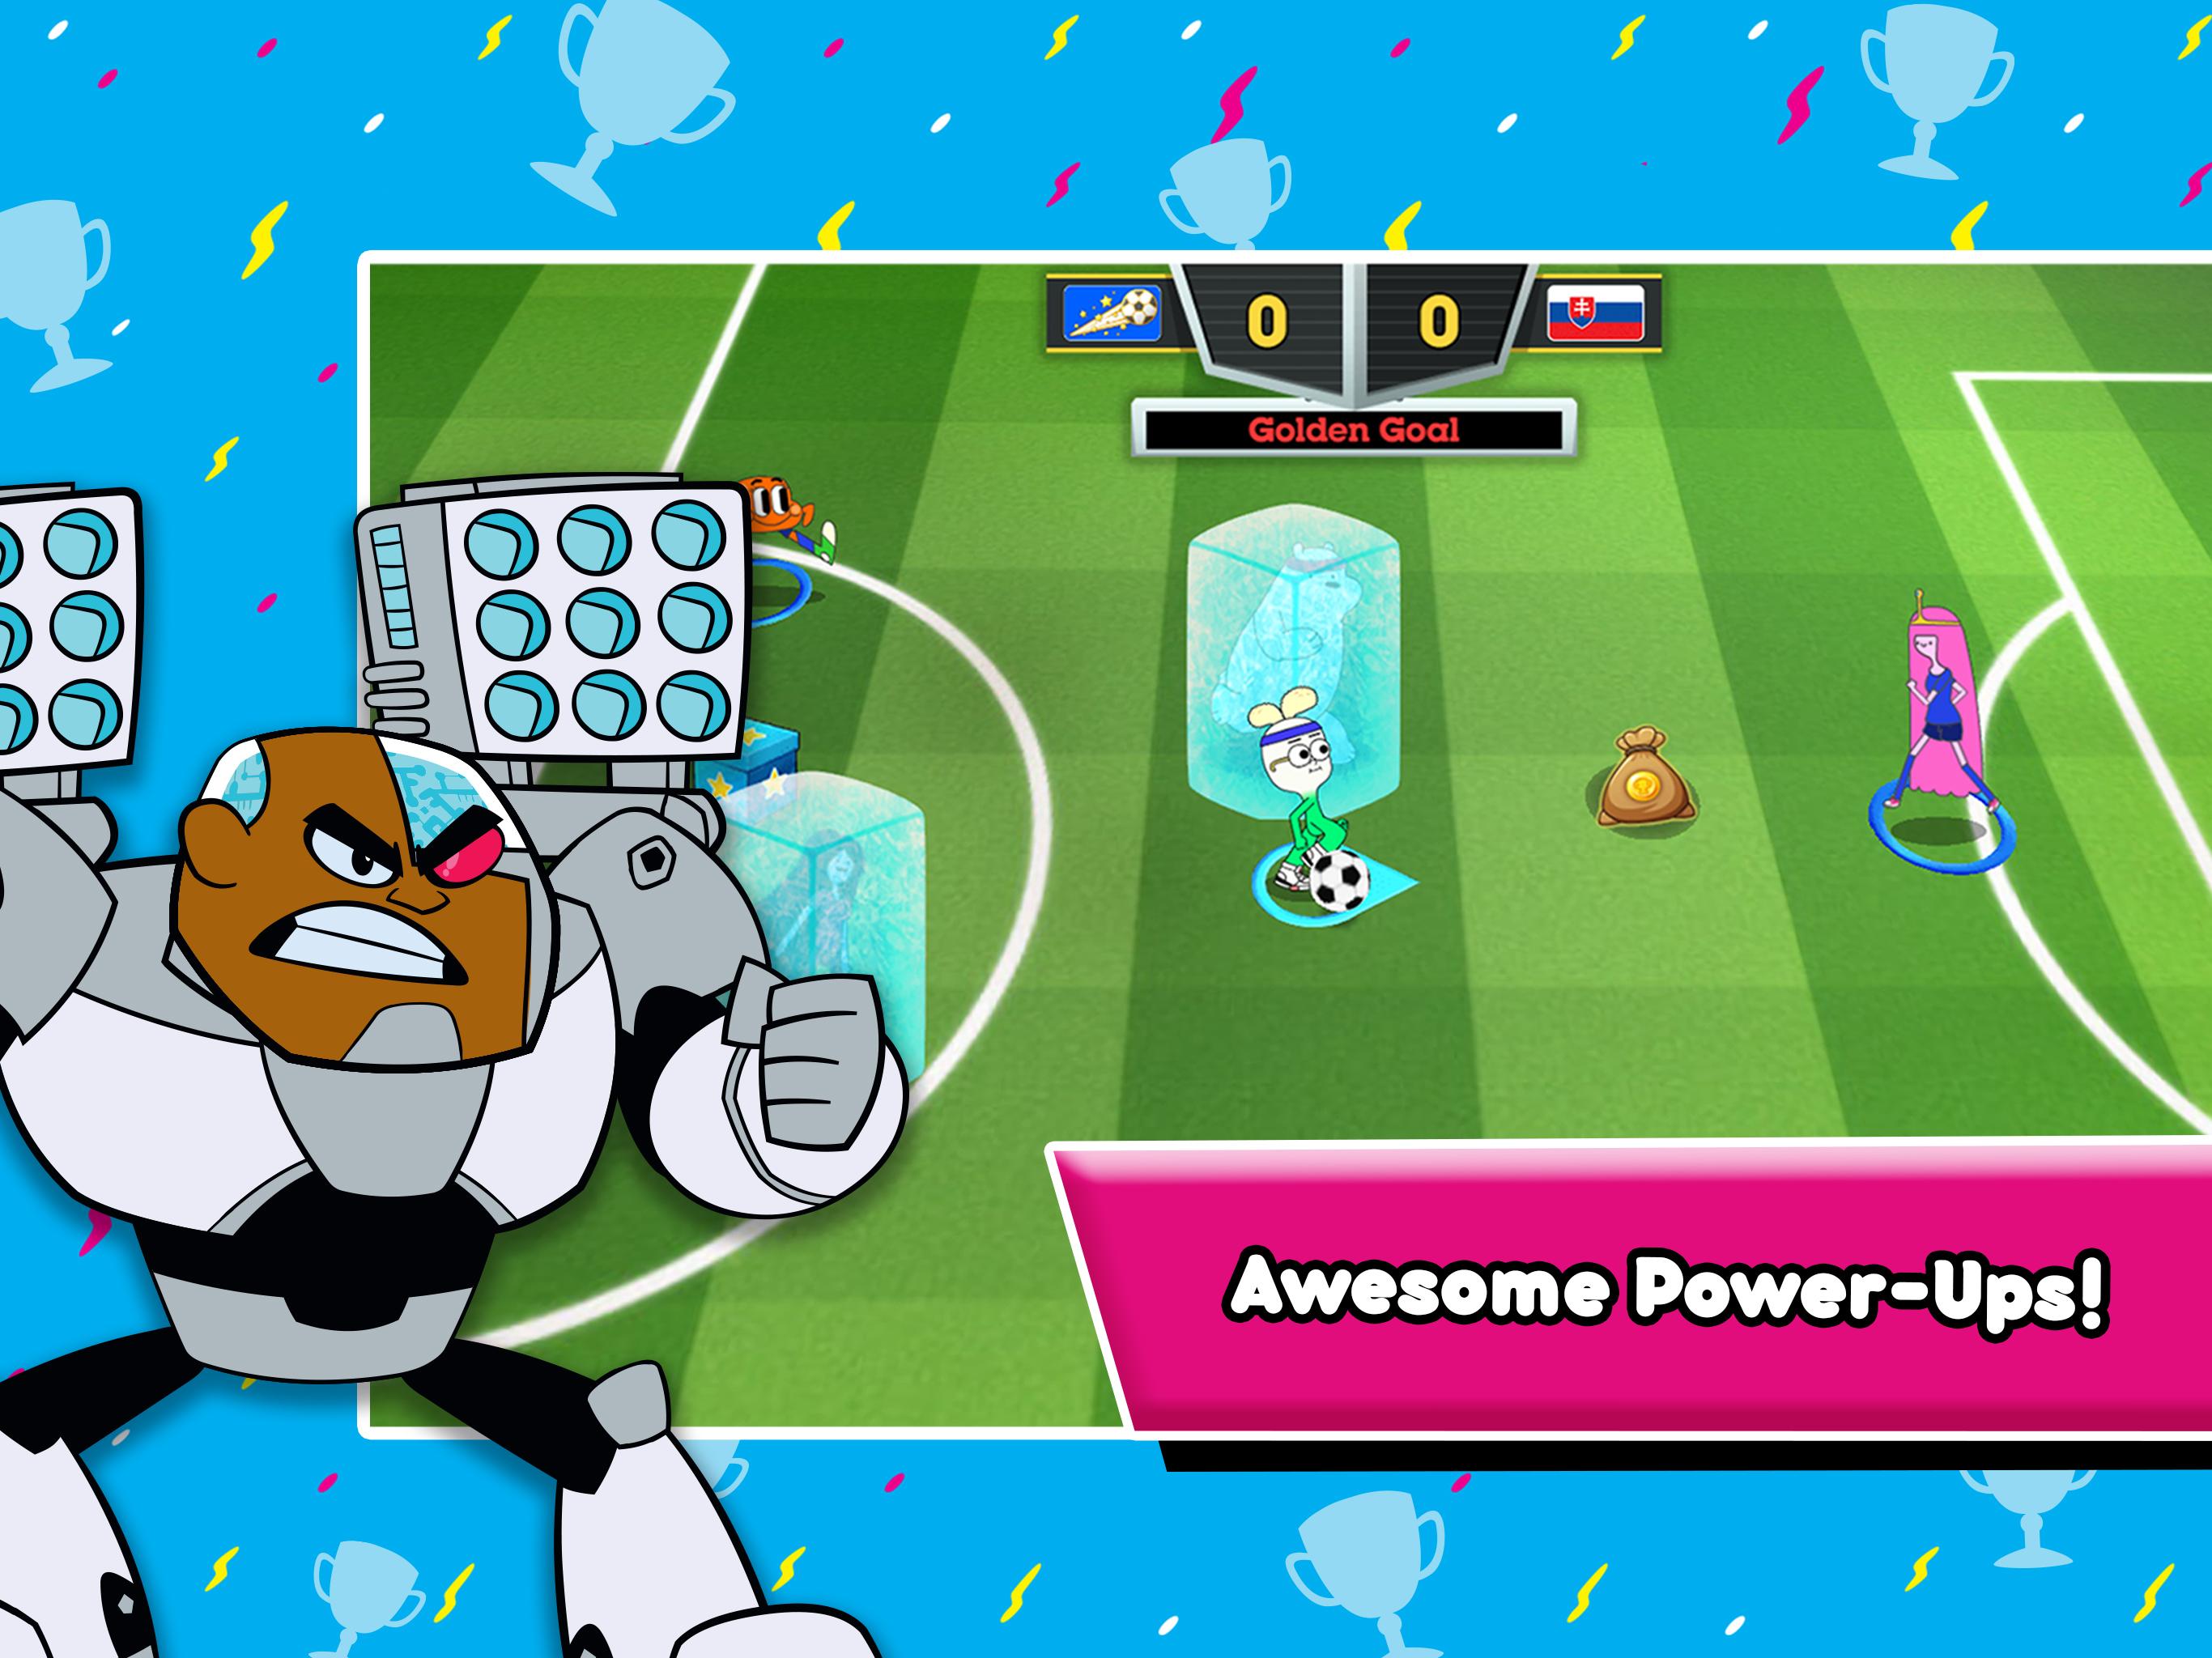 Toon Cup - Cartoon Network's Soccer Game for Android - APK ... - 